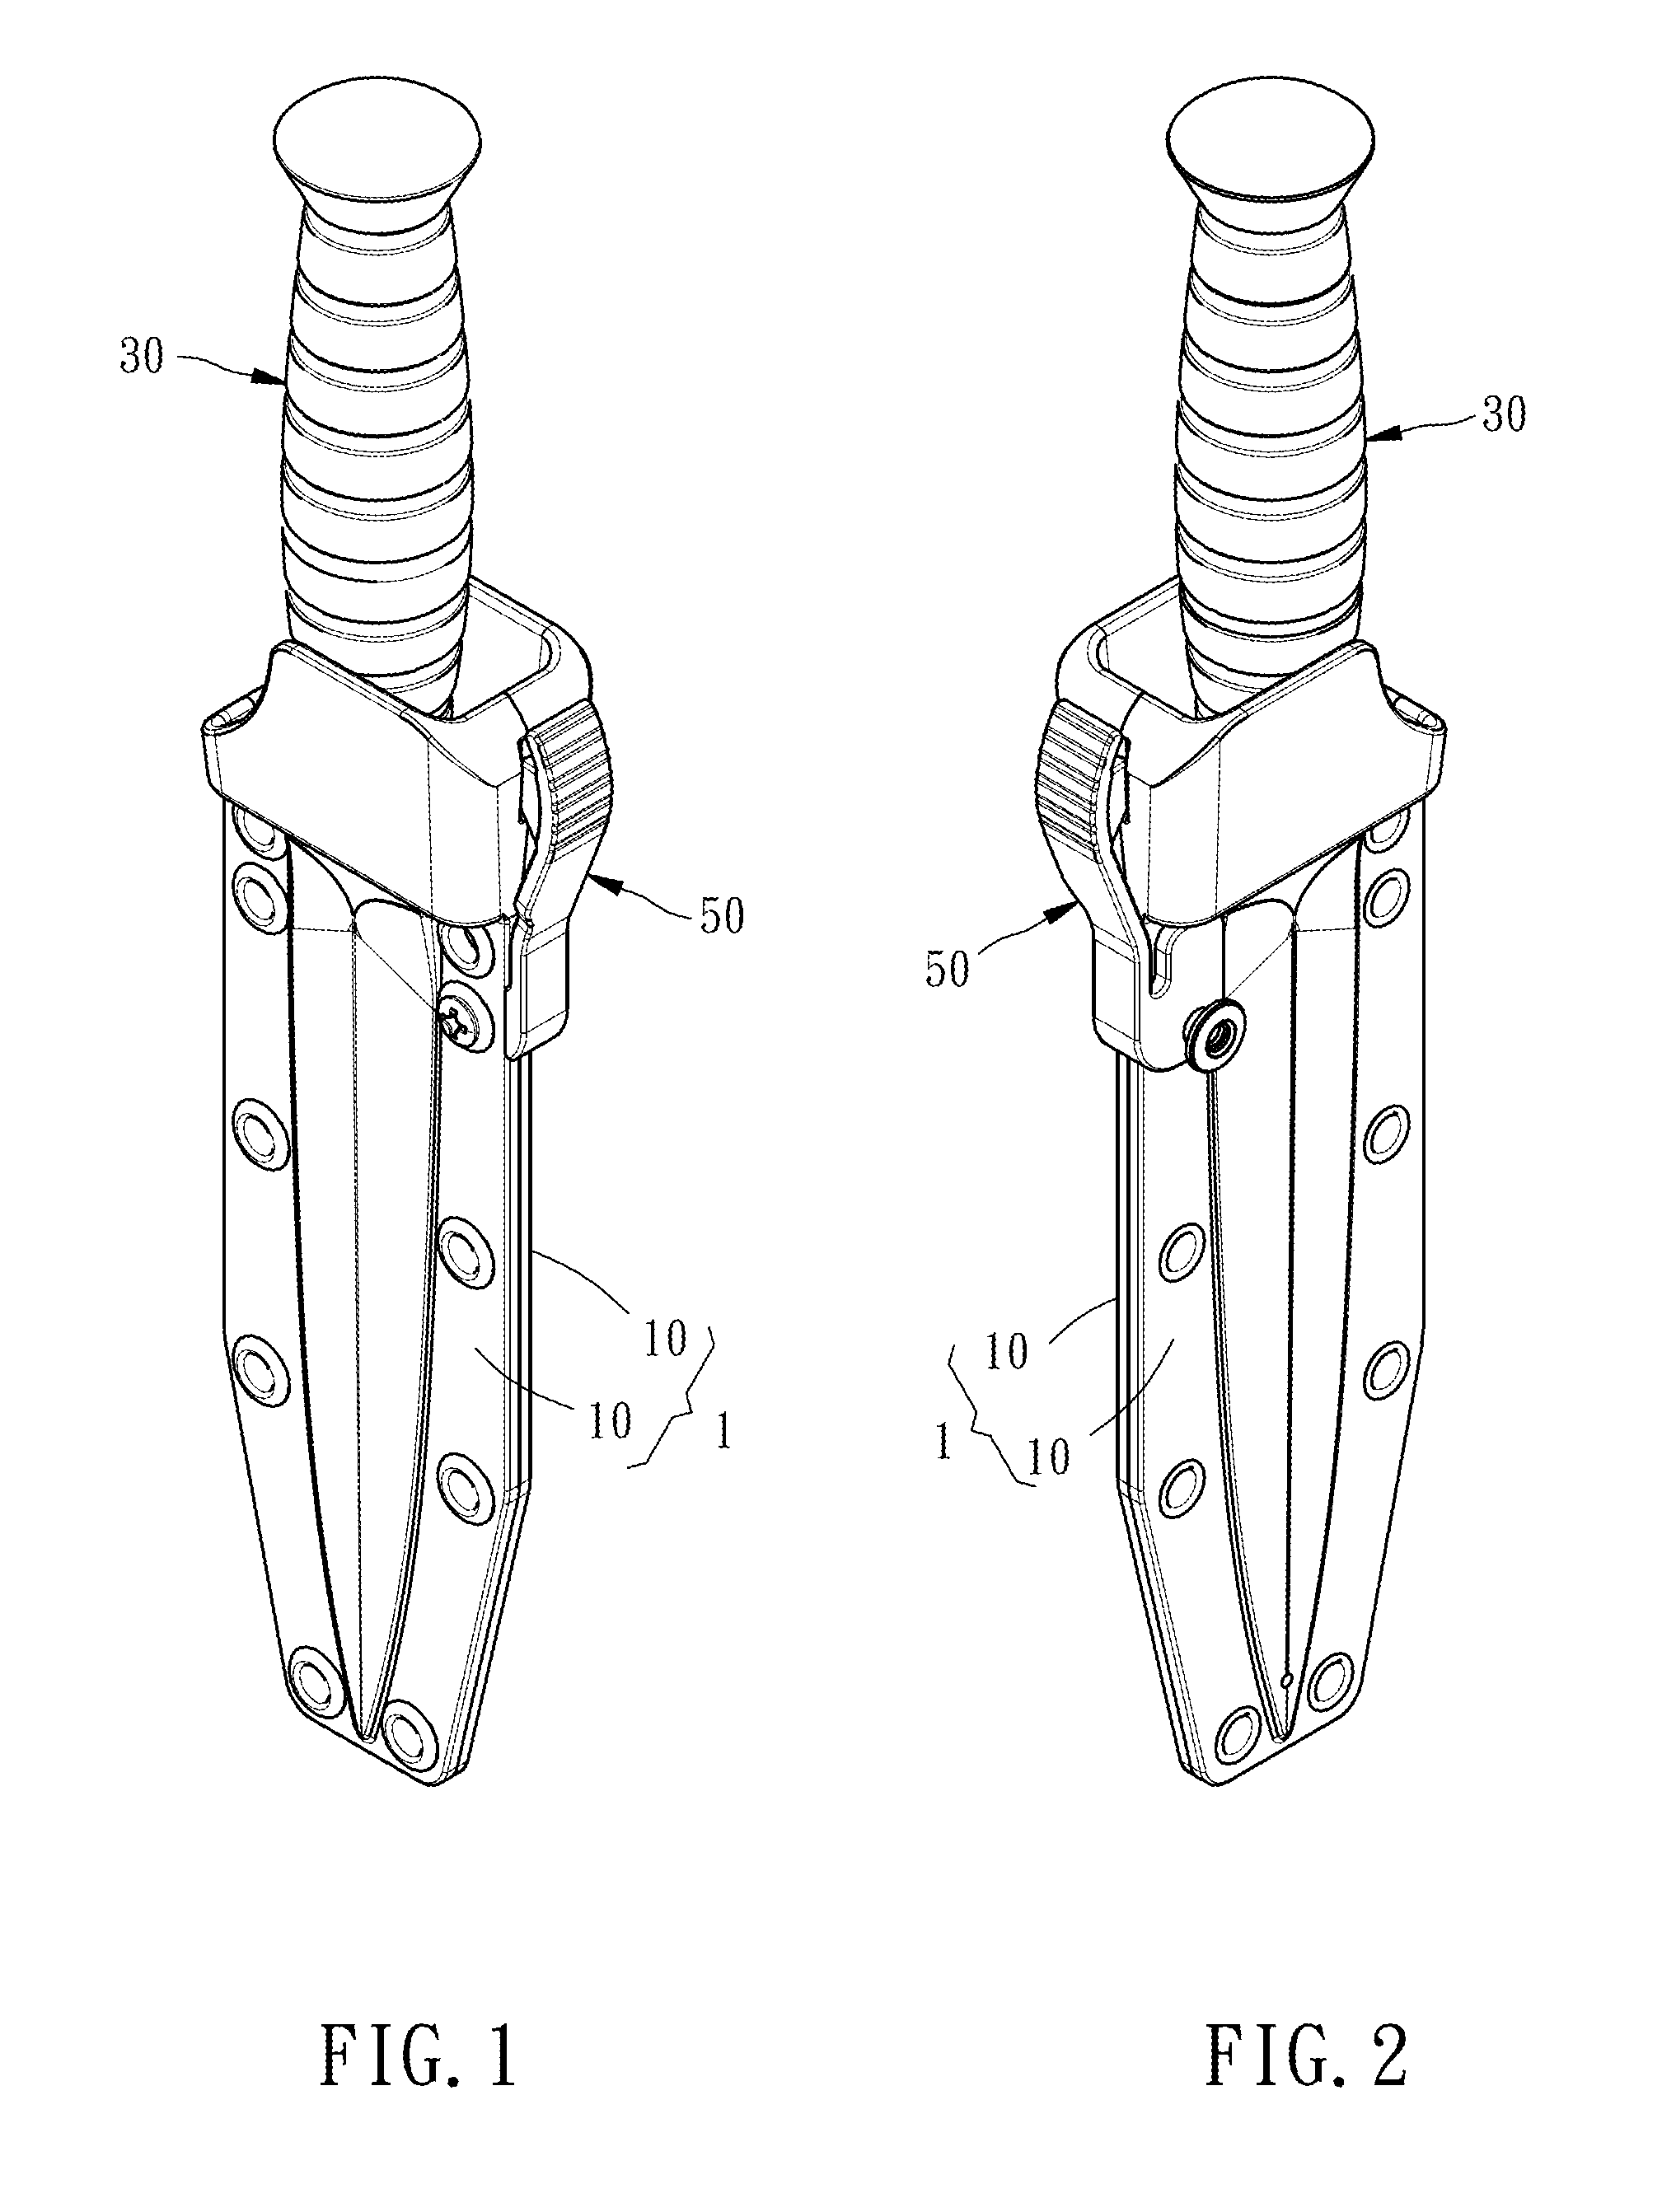 Knife and sheath assembly with realeasable knife securing function